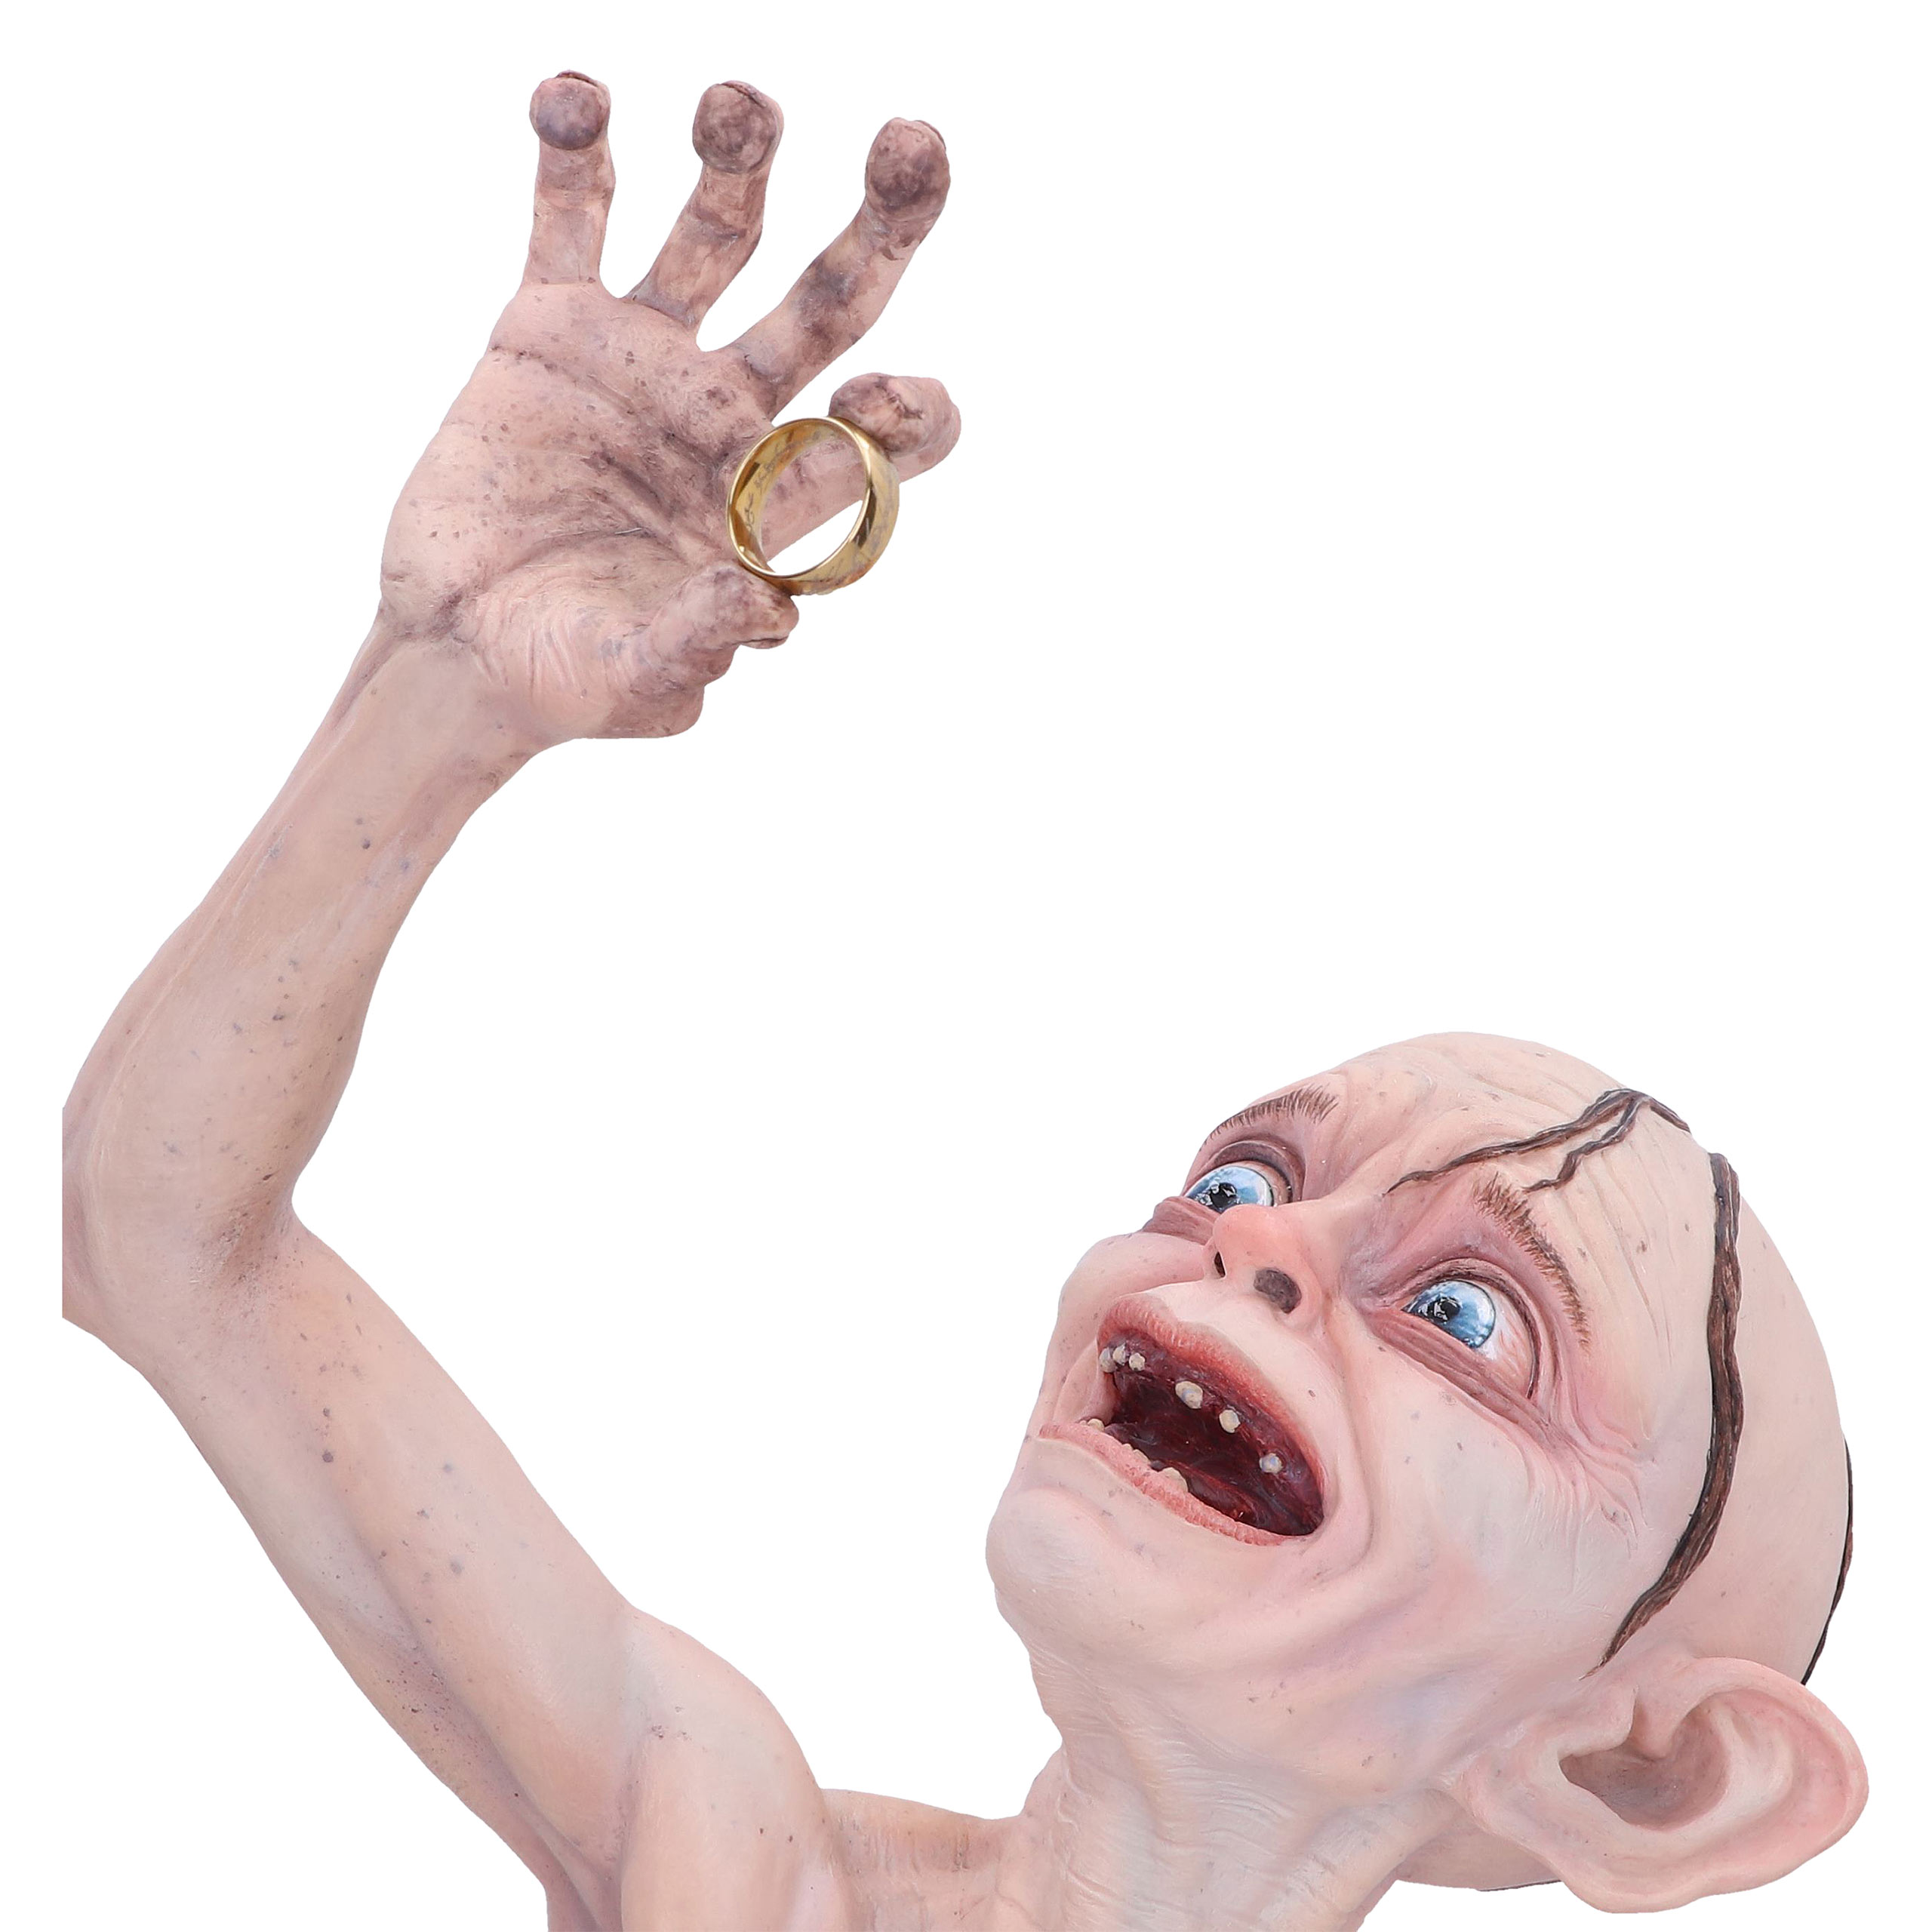 Lord of the Rings - Gollum Bust Deluxe